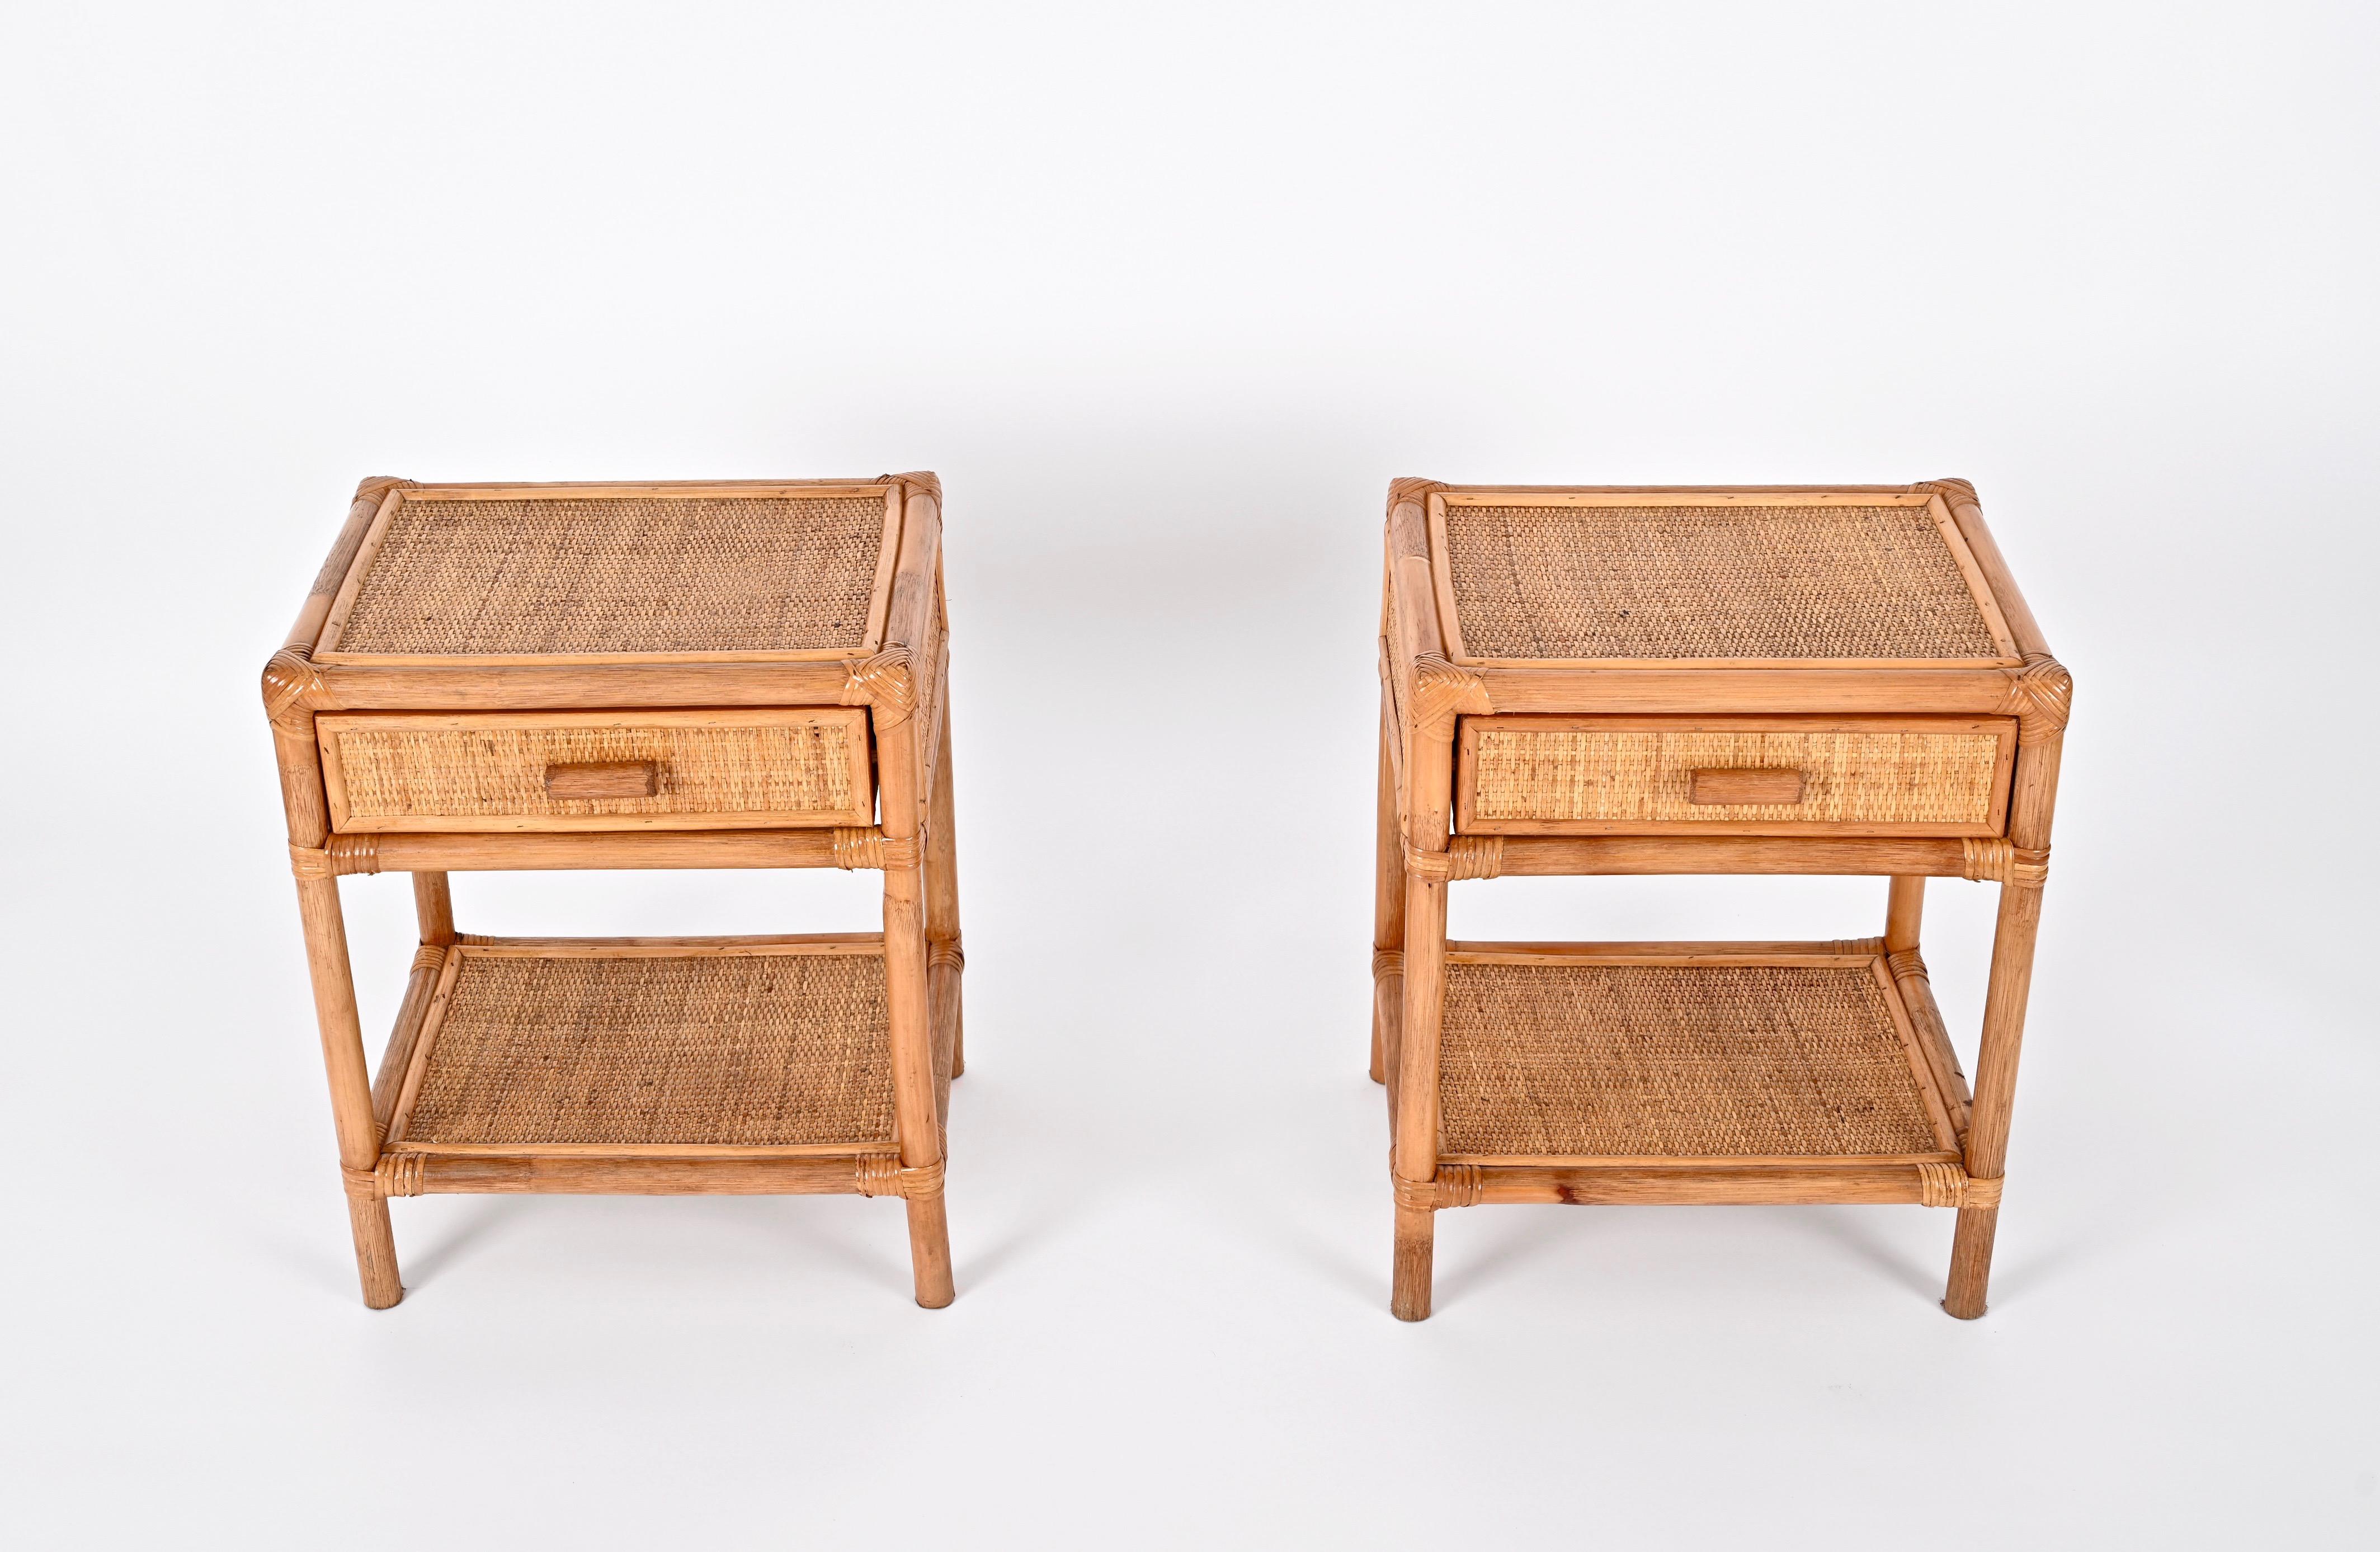 European Pair of Mid-Century Modern Bamboo Cane and Rattan Italian Bedside Tables, 1970s